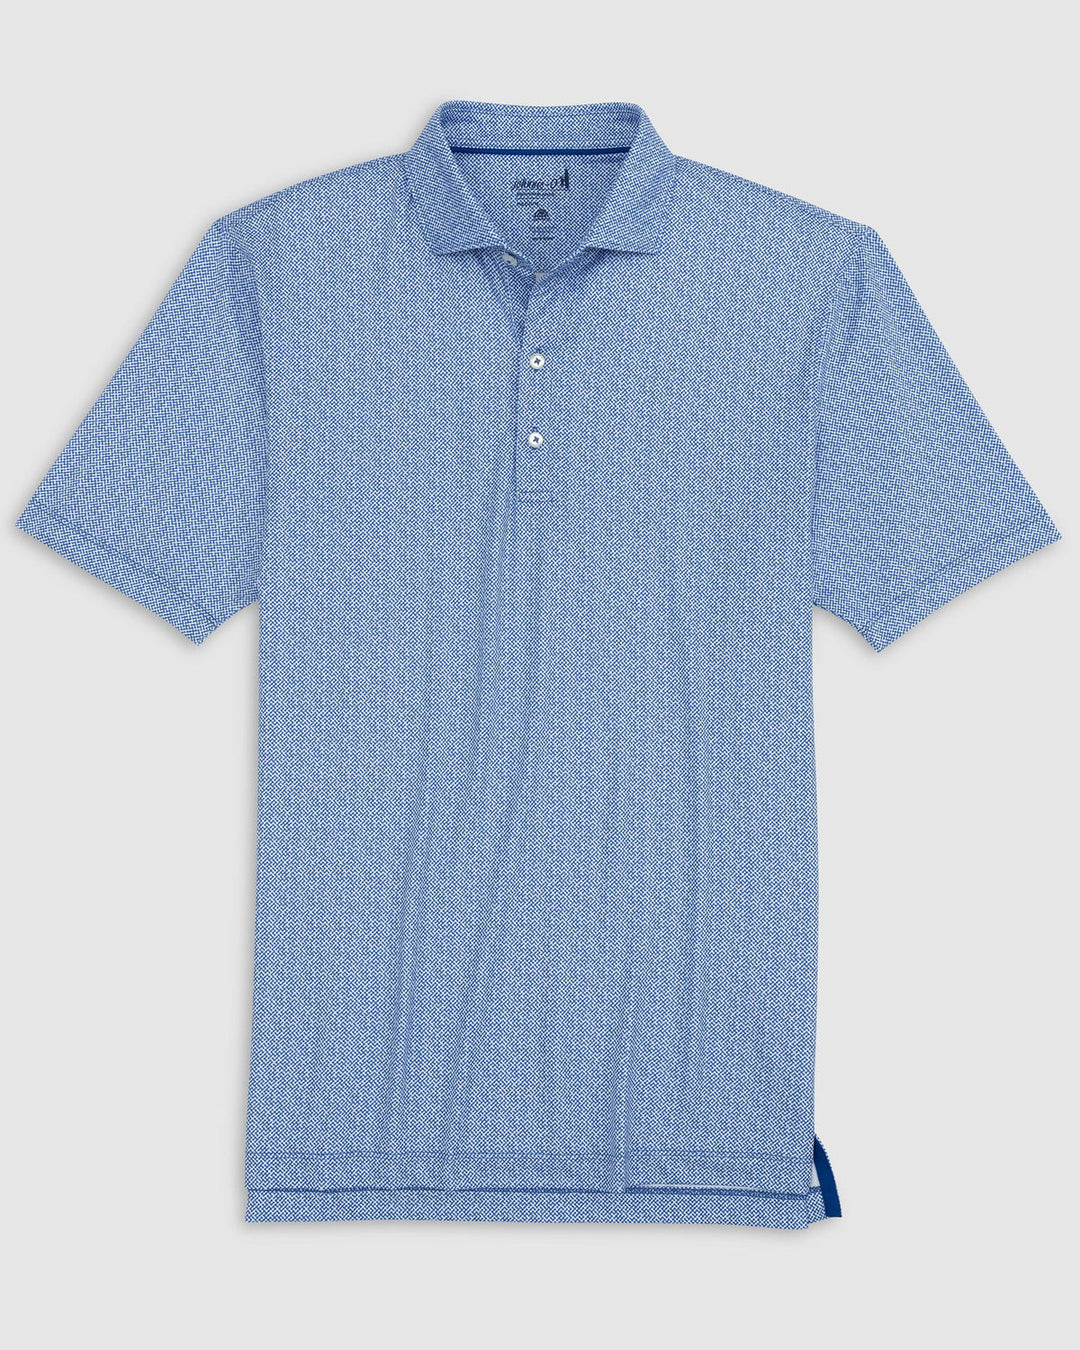 Johnnie-O Hinson Printed Jersey Performance Polo